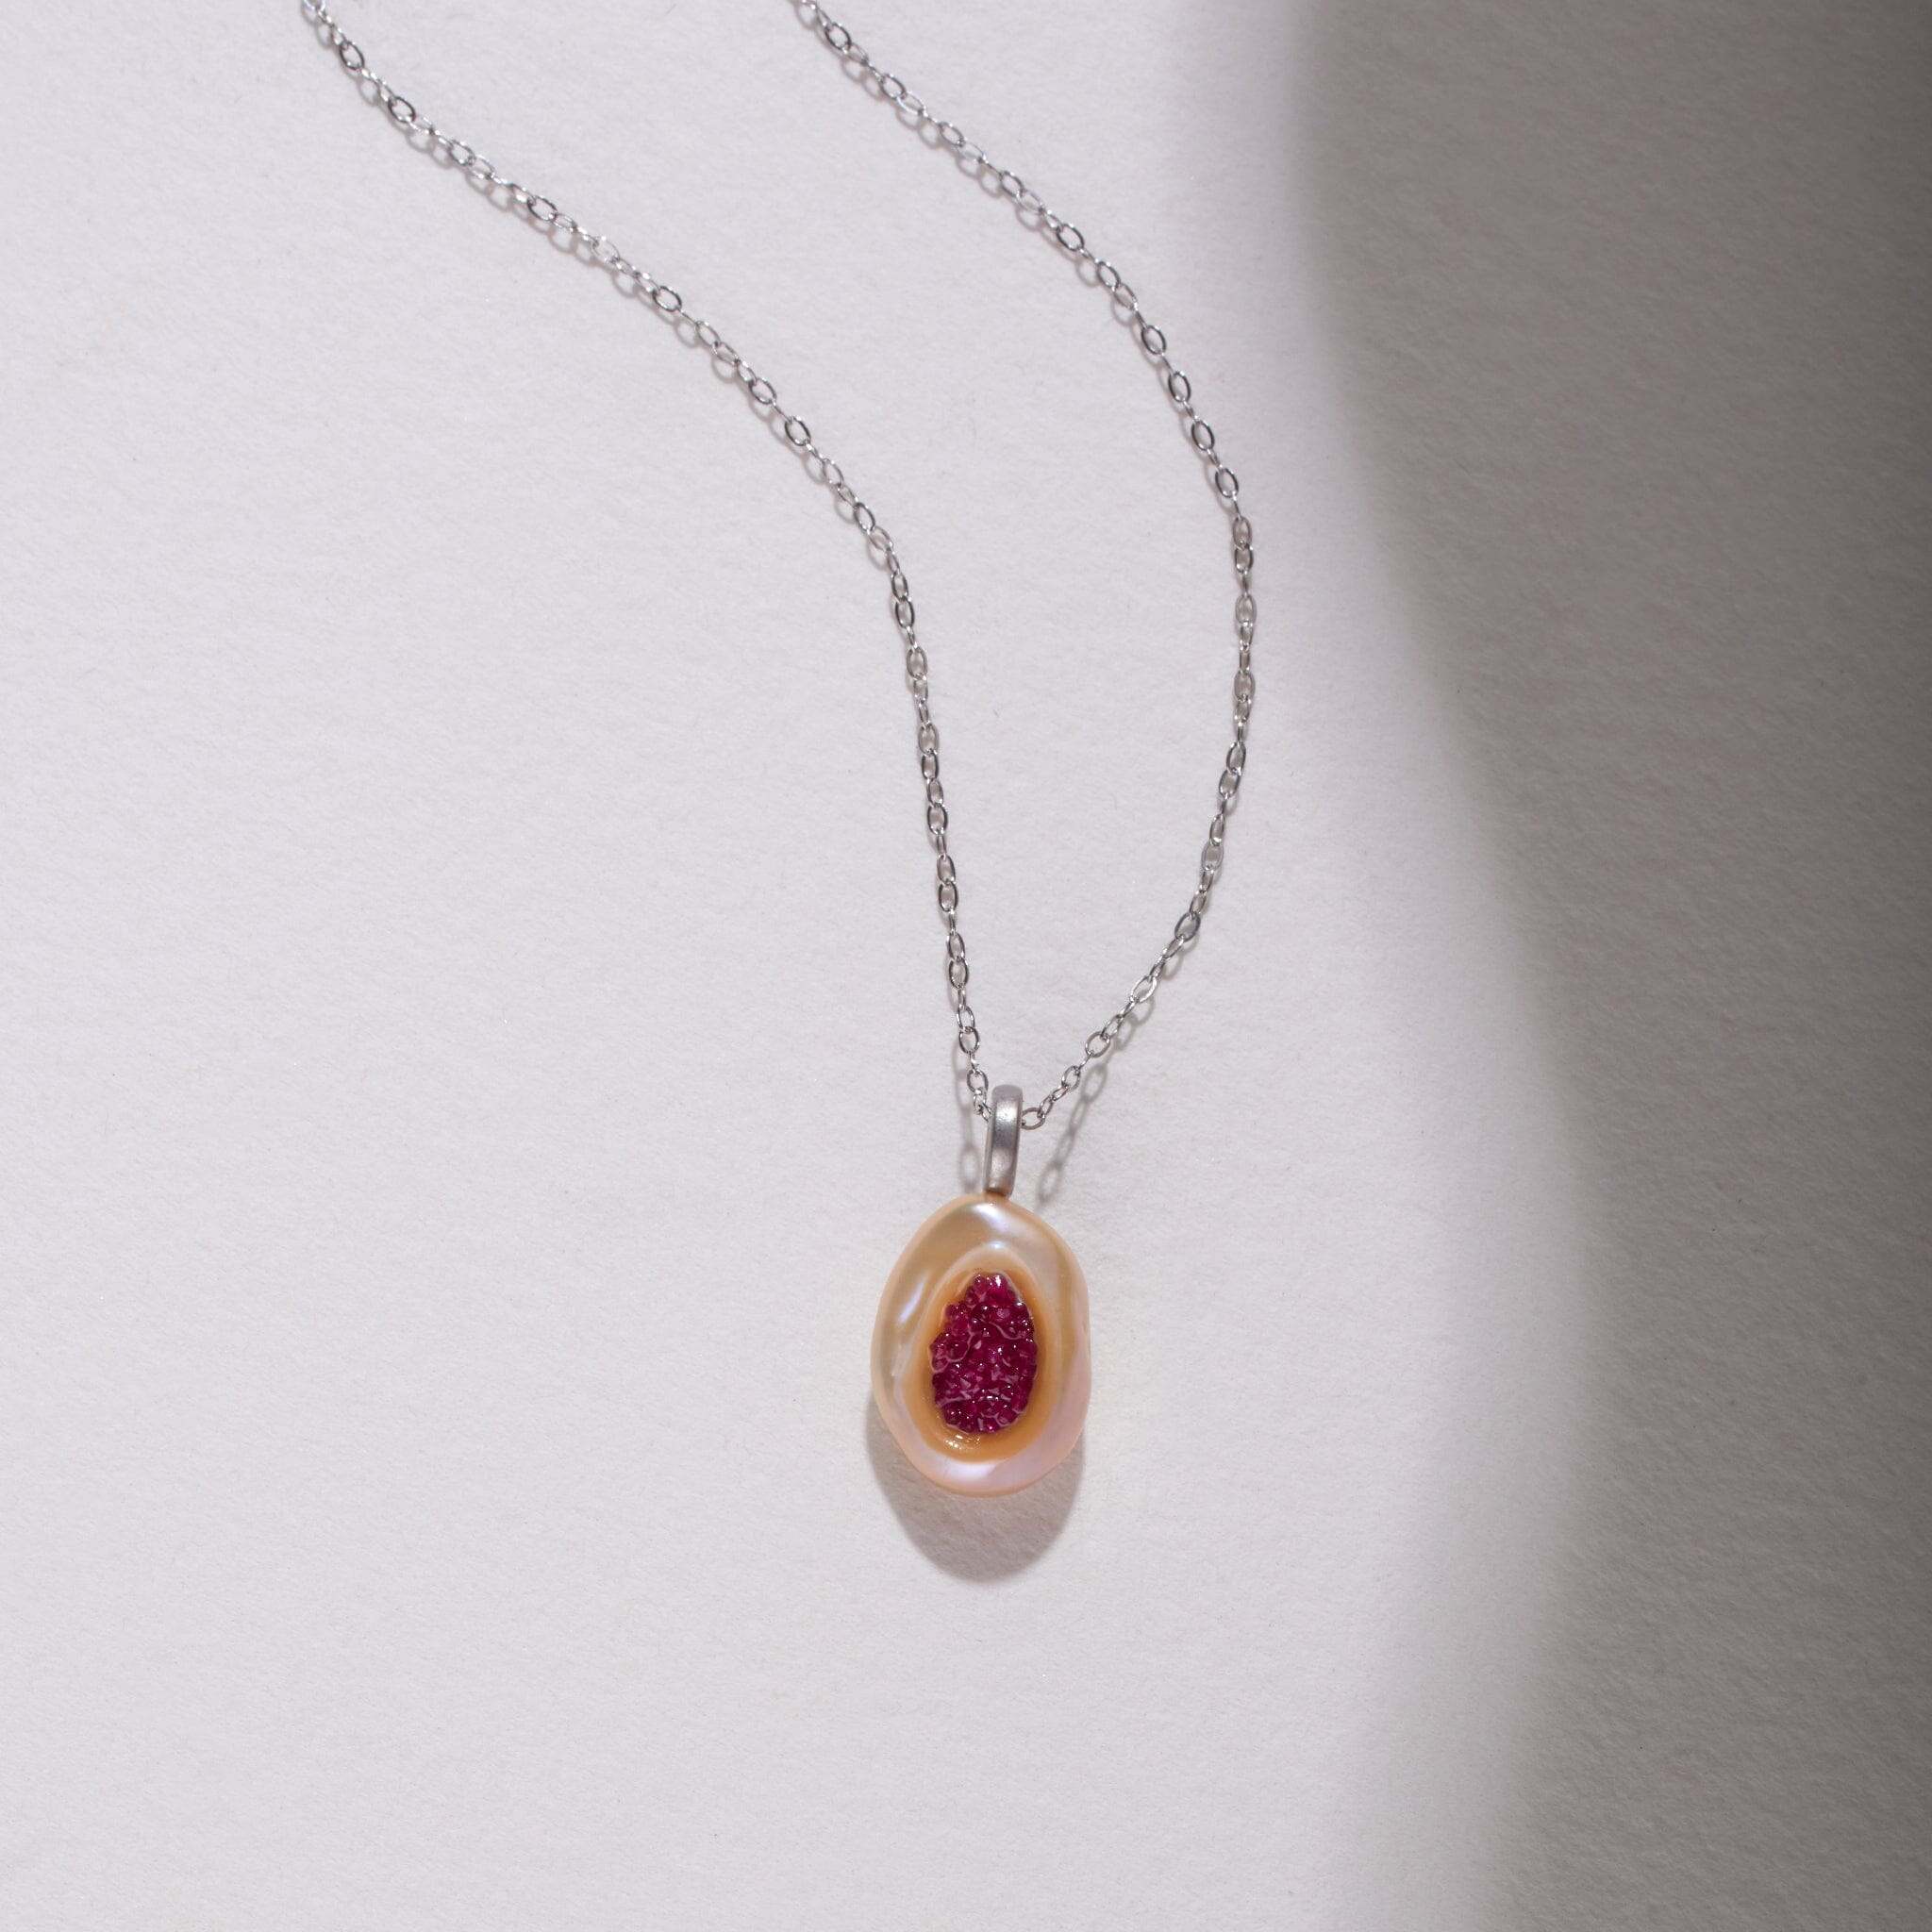 Piccolo Finestrino Collection Freshwater Pearl Pendant with Ruby